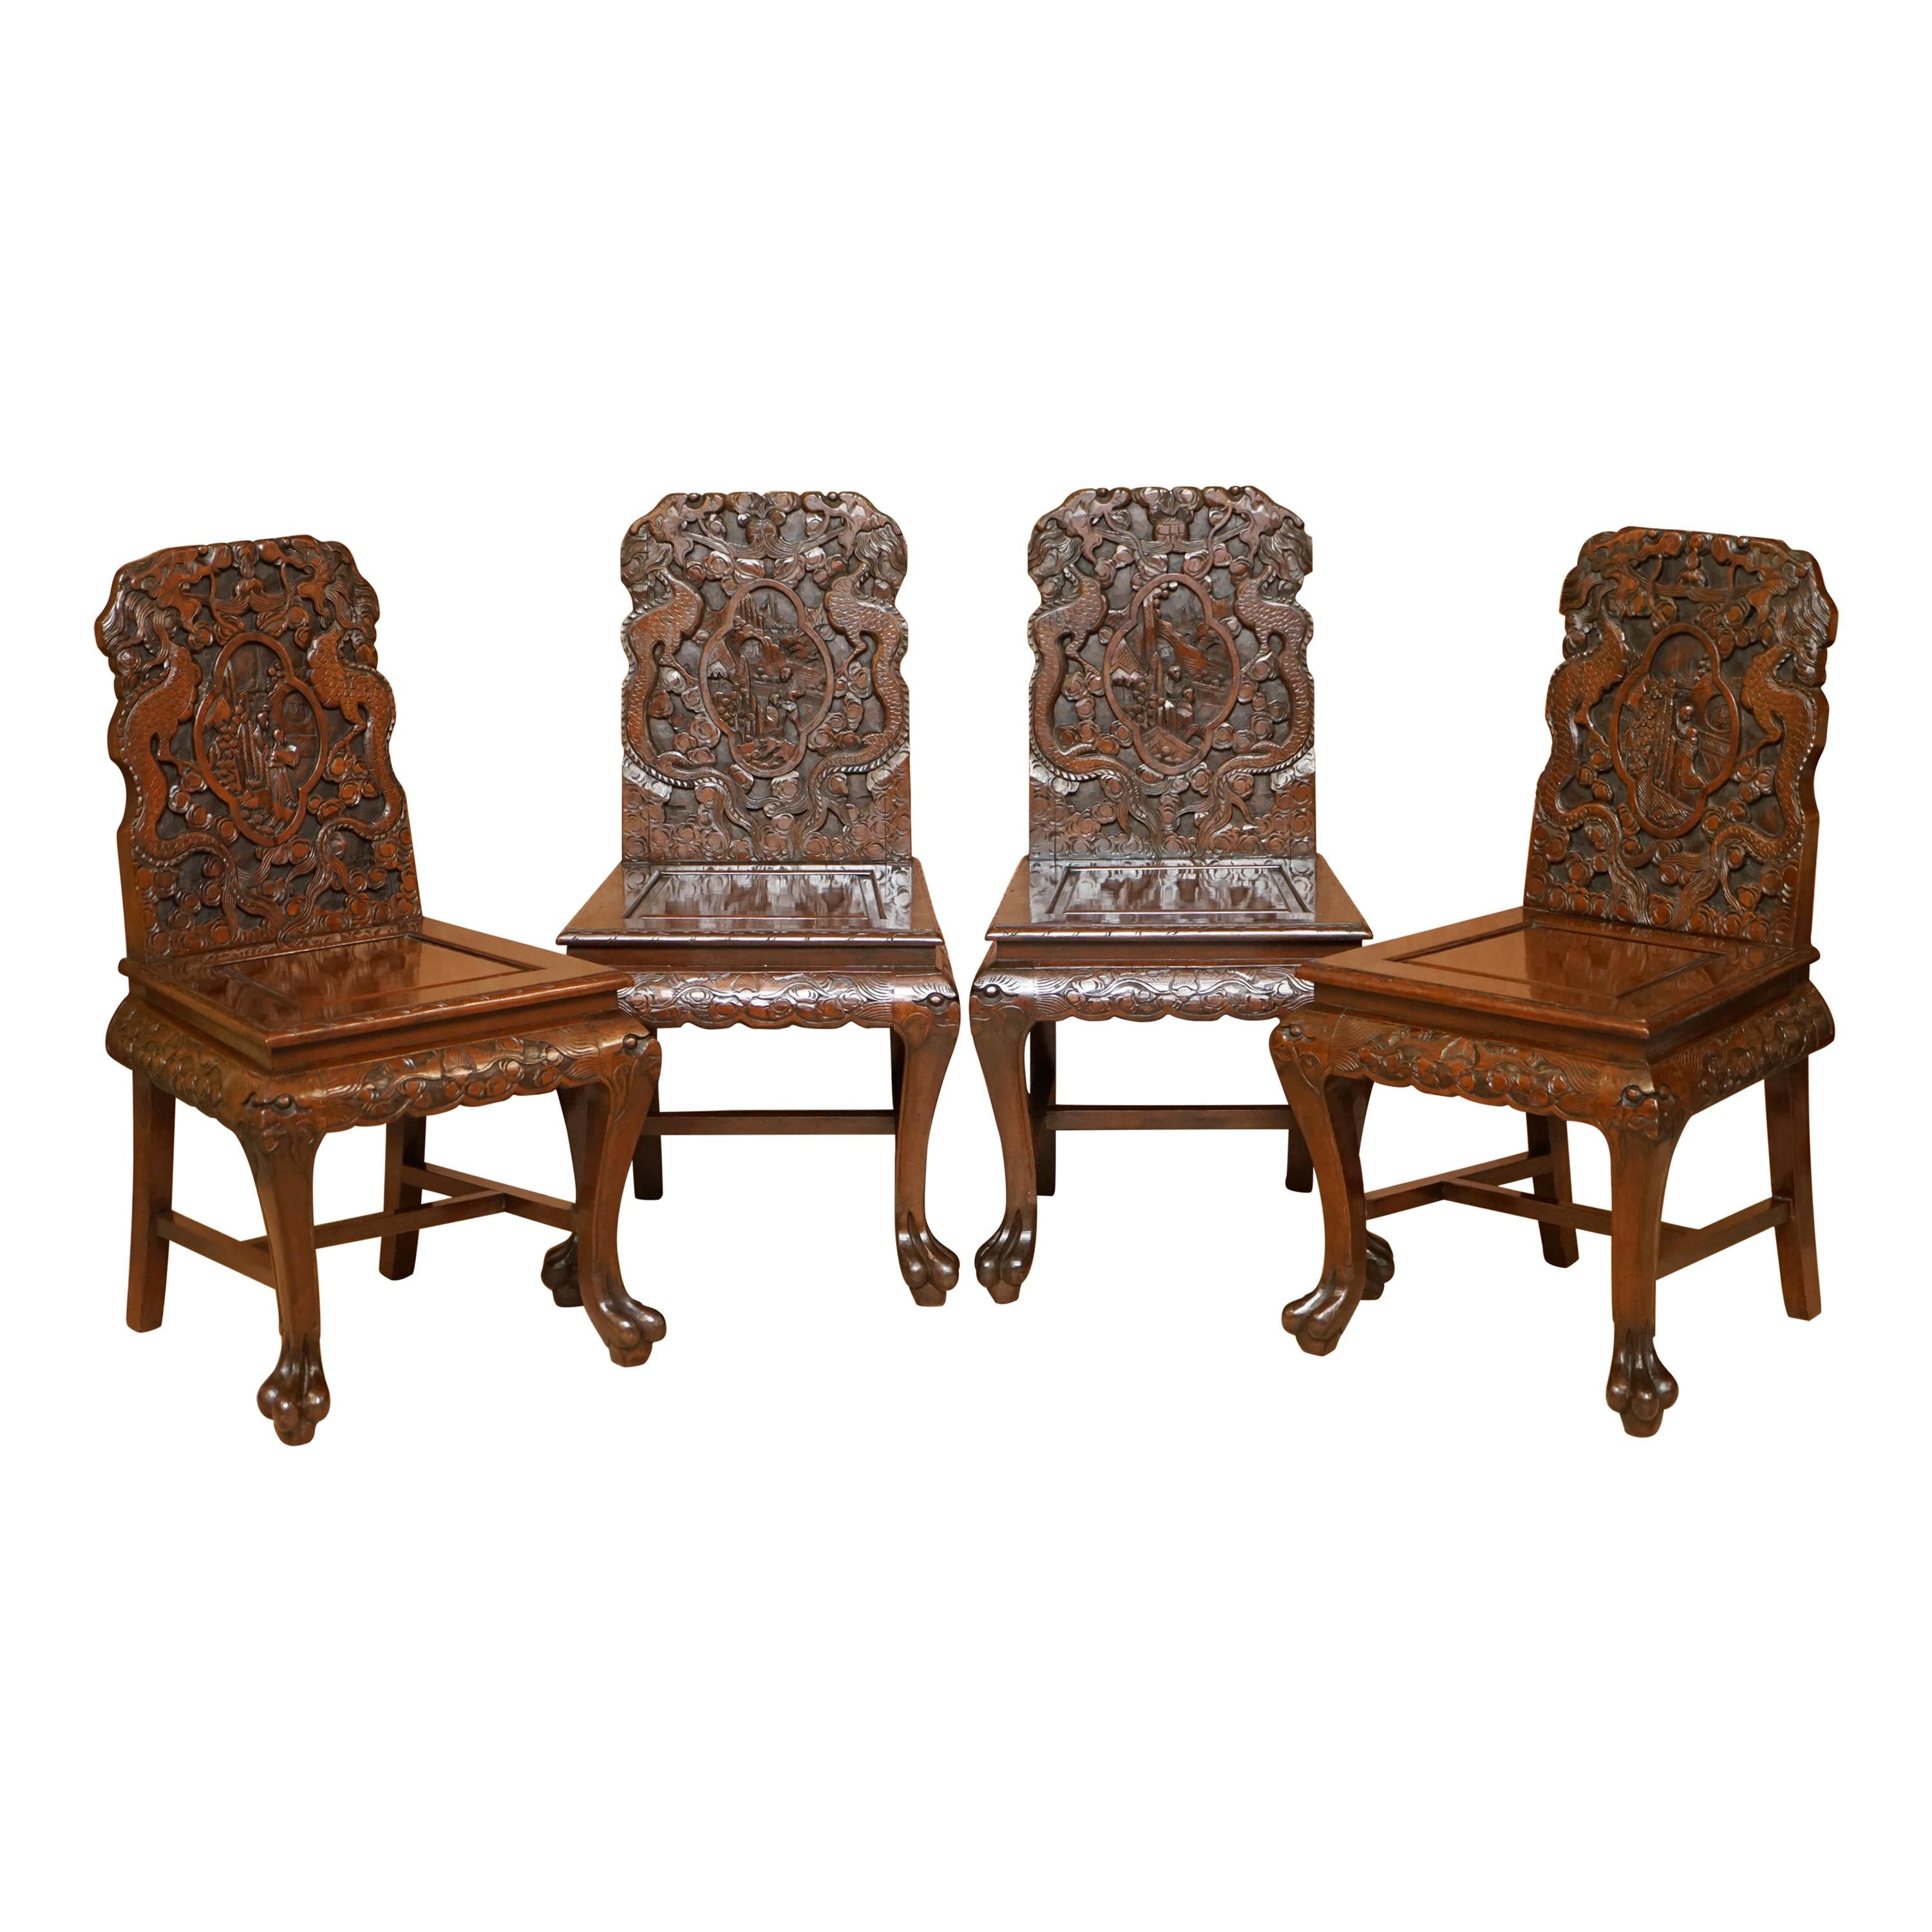 Four Ornately Carved Chinese Export circa 1900 Dragon Dining Occasional Chairs